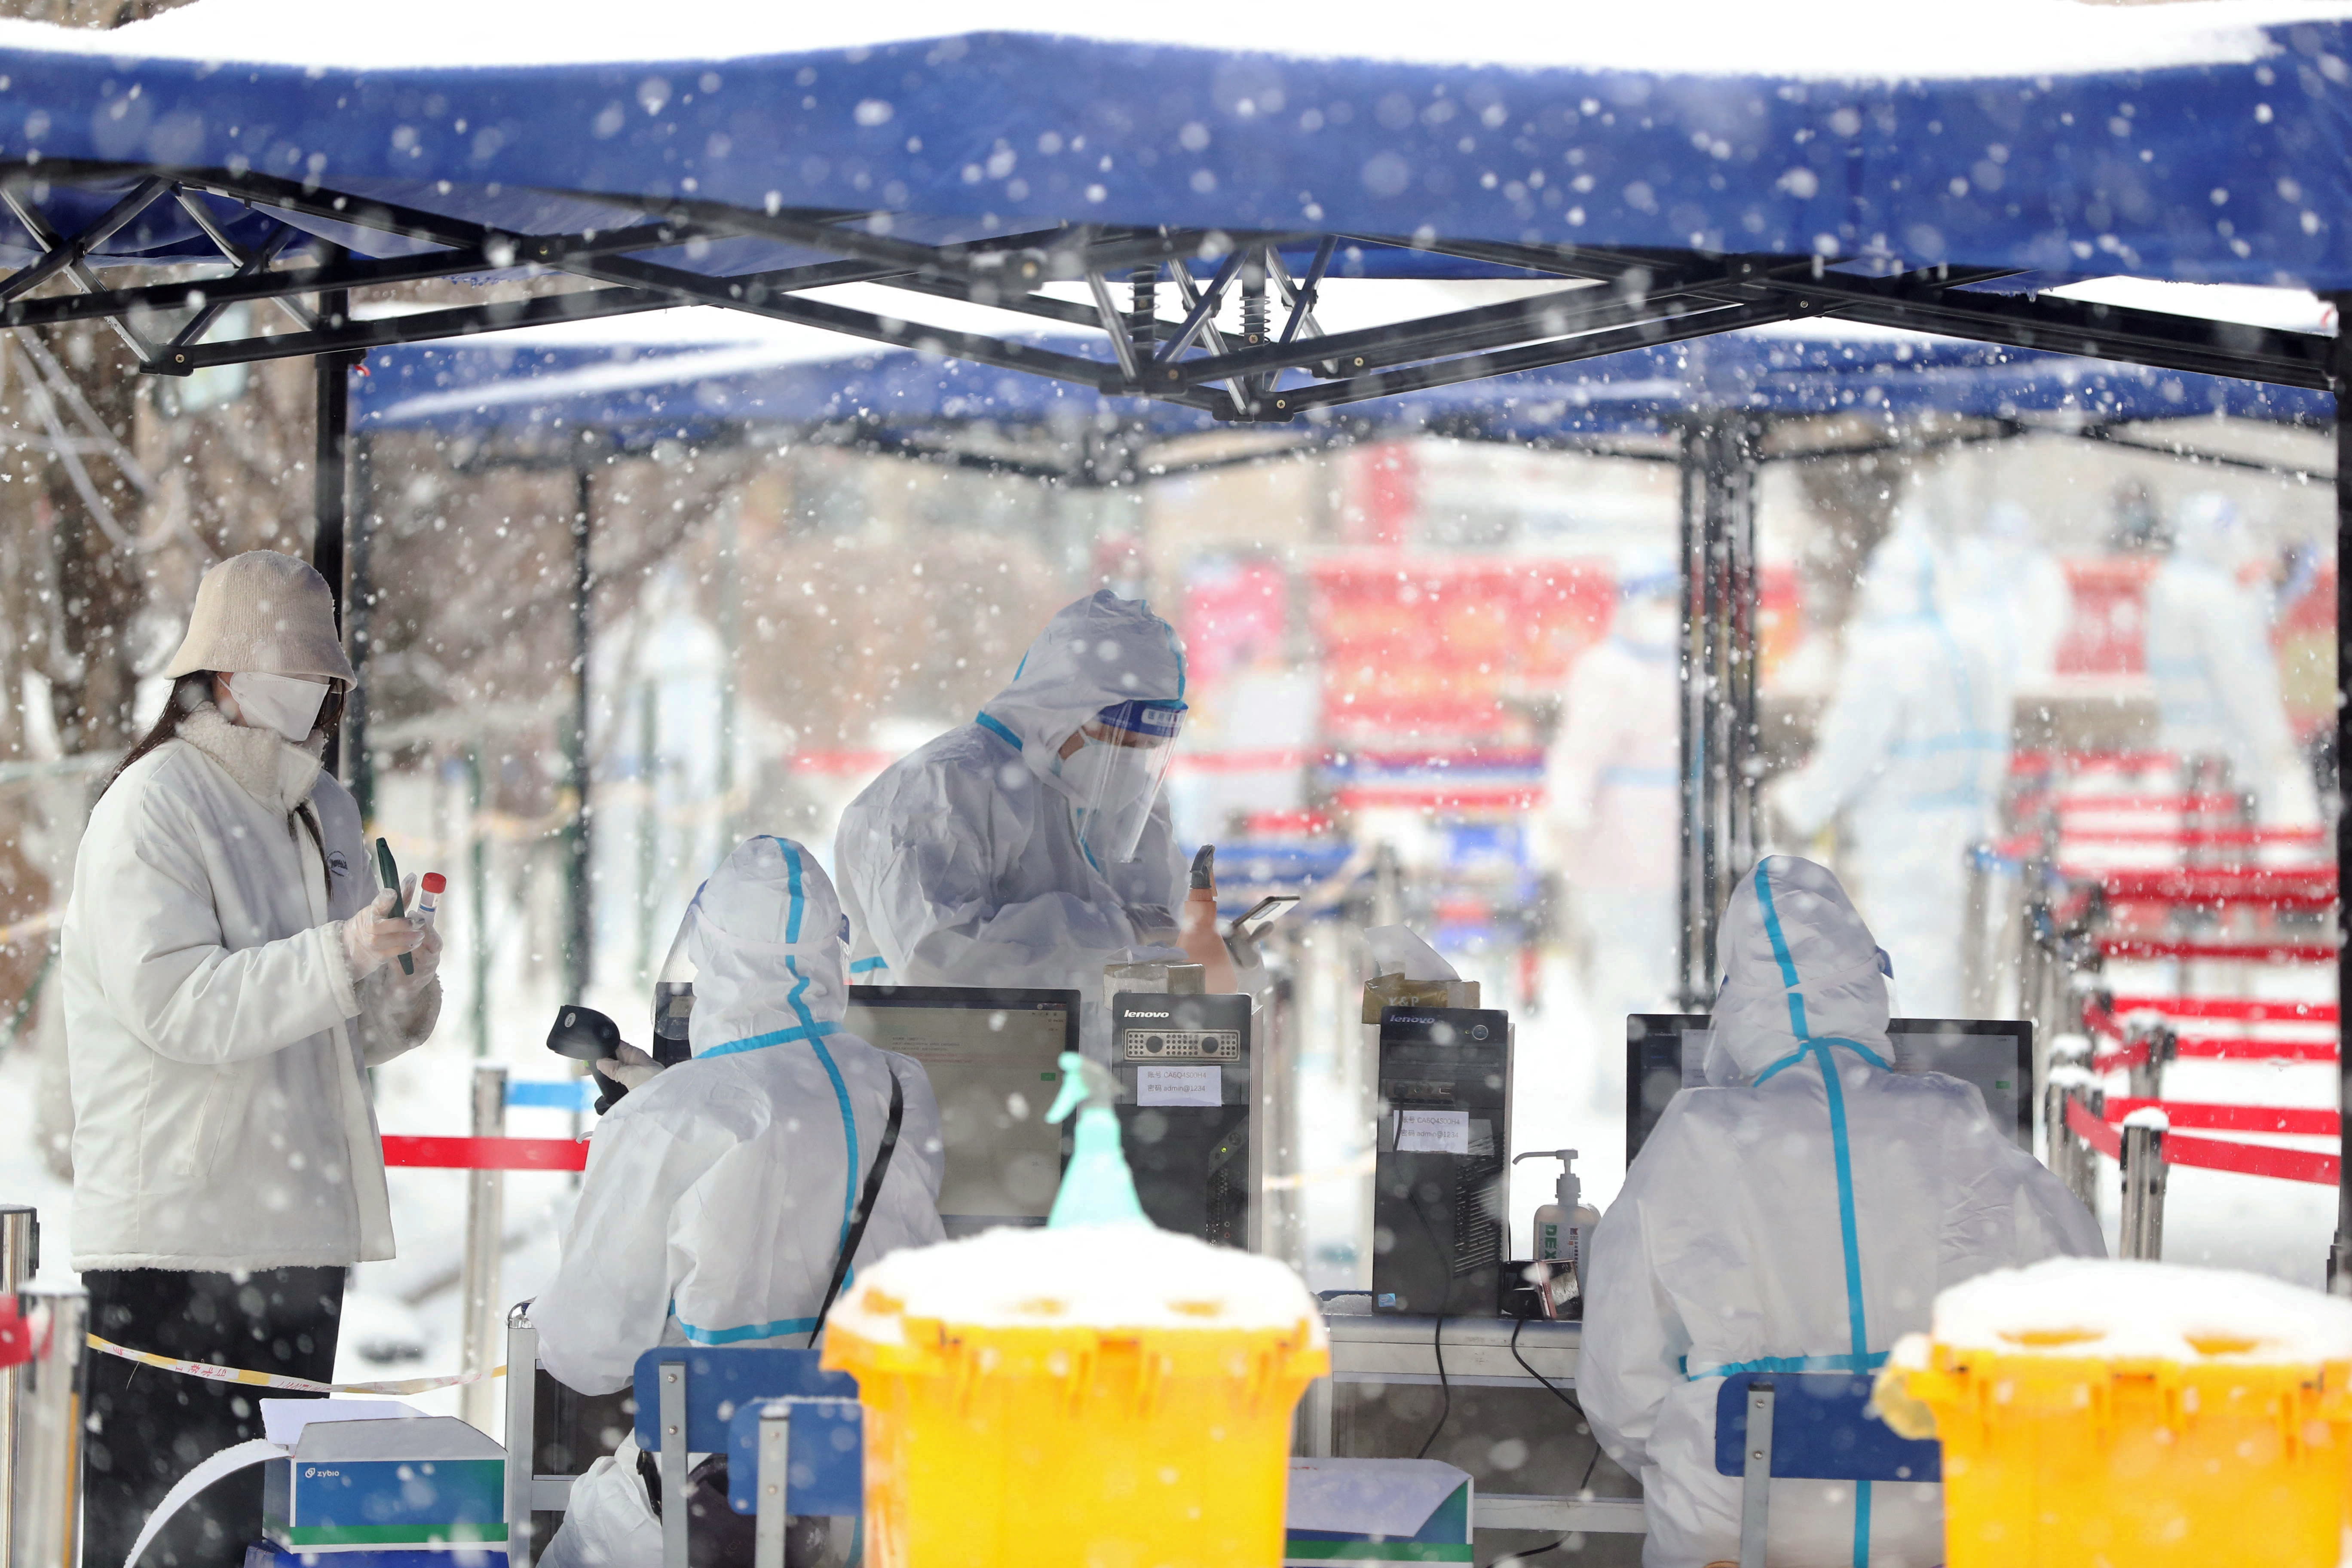 A resident prepares to get tested amid the snow at a nucleic acid testing site, following the Covid-19 outbreak in Changchun, Jilin province, China on March 15, 2022. 